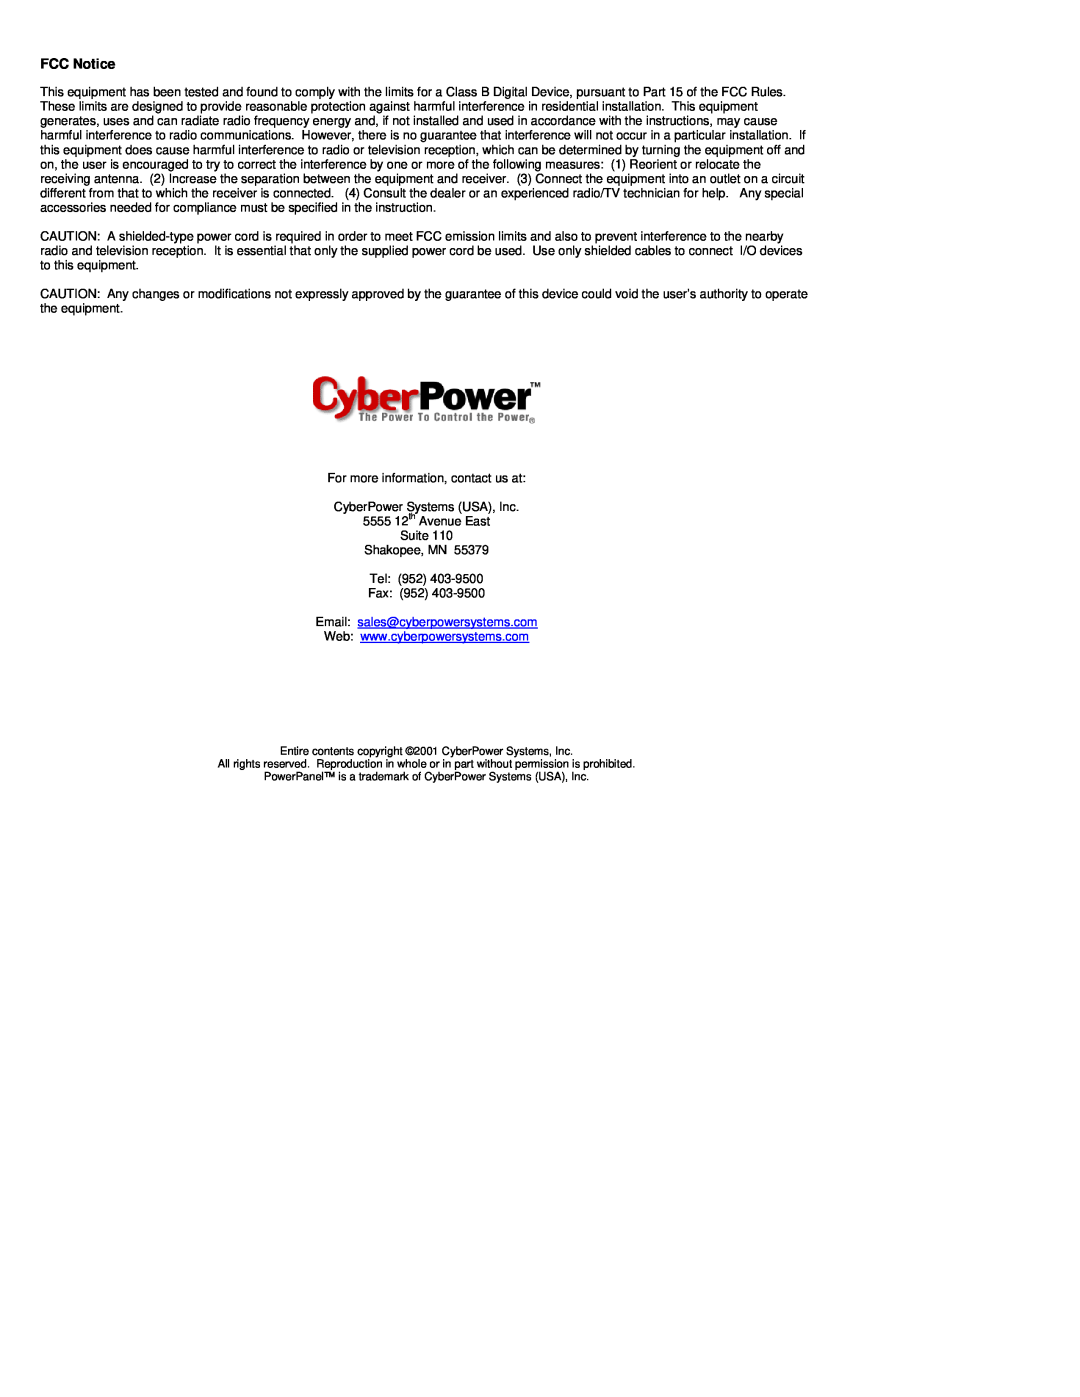 CyberPower Systems CPS320SL, CPS500SL, CPS375SL, CPS575SL, CPS650SL user manual FCC Notice, Email sales@cyberpowersystems.com 